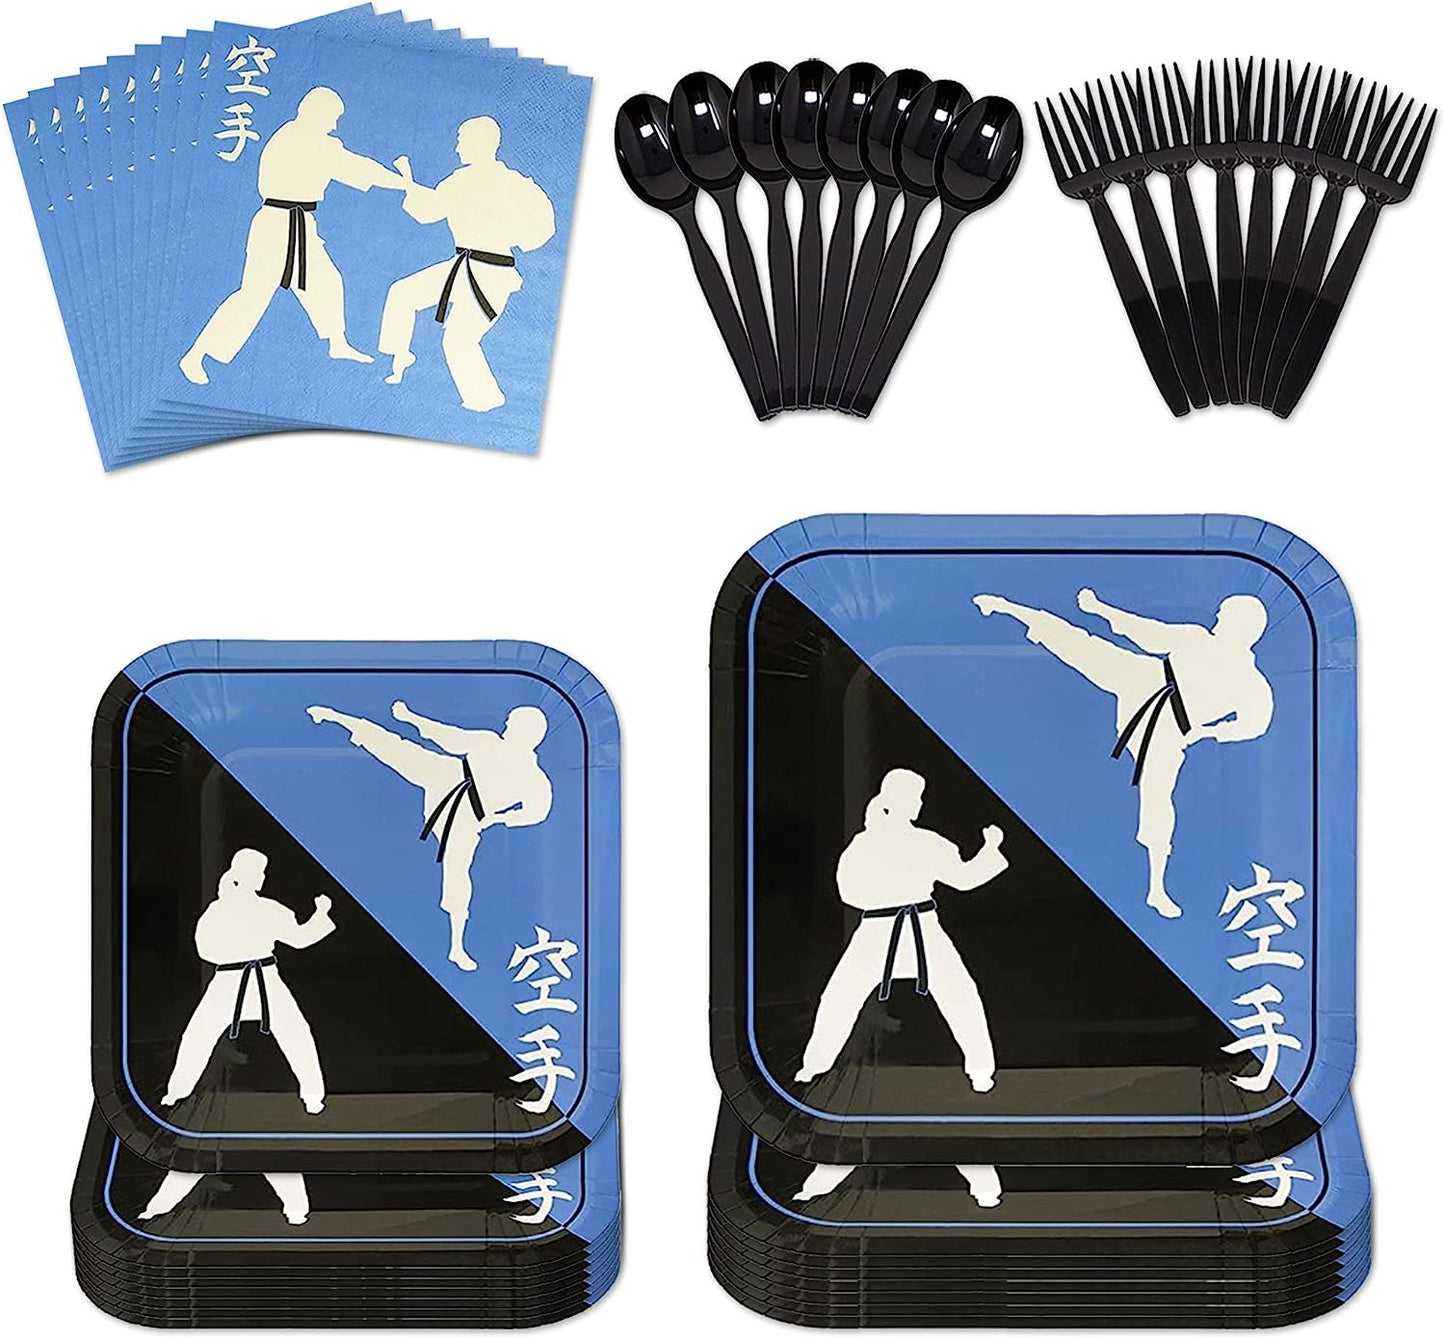 Karate Party Pack with paper dinner plates, paper dessert plates, paper lunch napkins, plastic forks, and plastic spoons. Perfect for a Karate themed birthday party